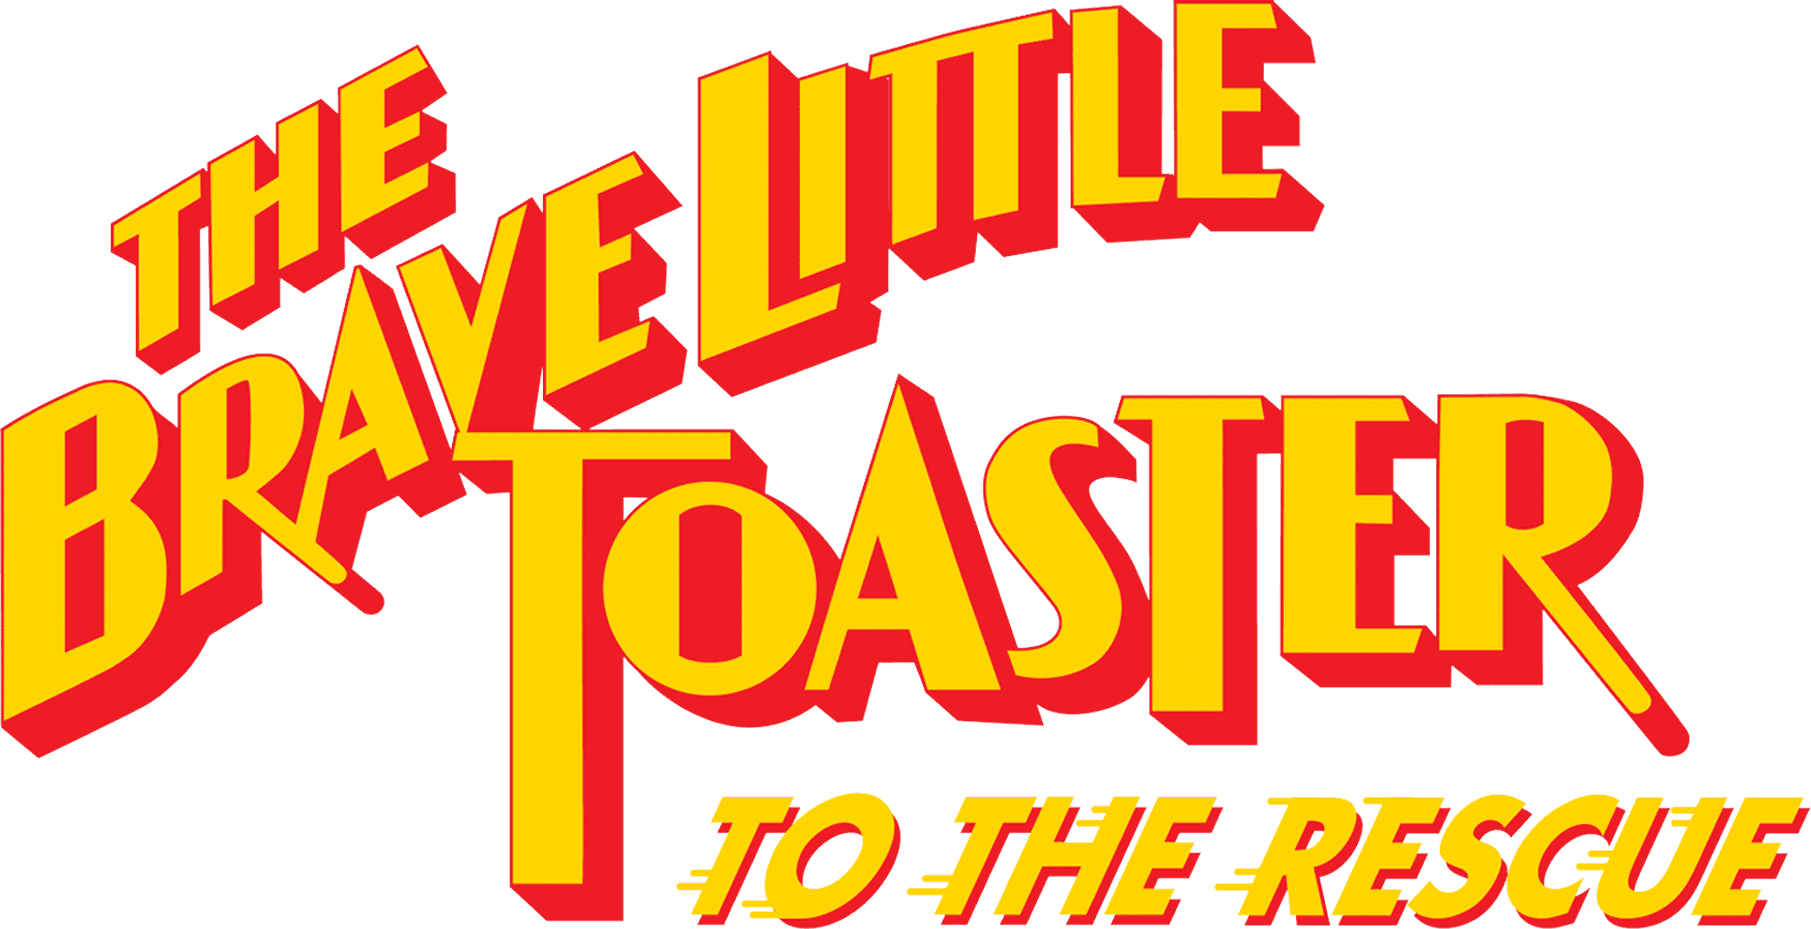 The Brave Little Toaster to the Rescue logo